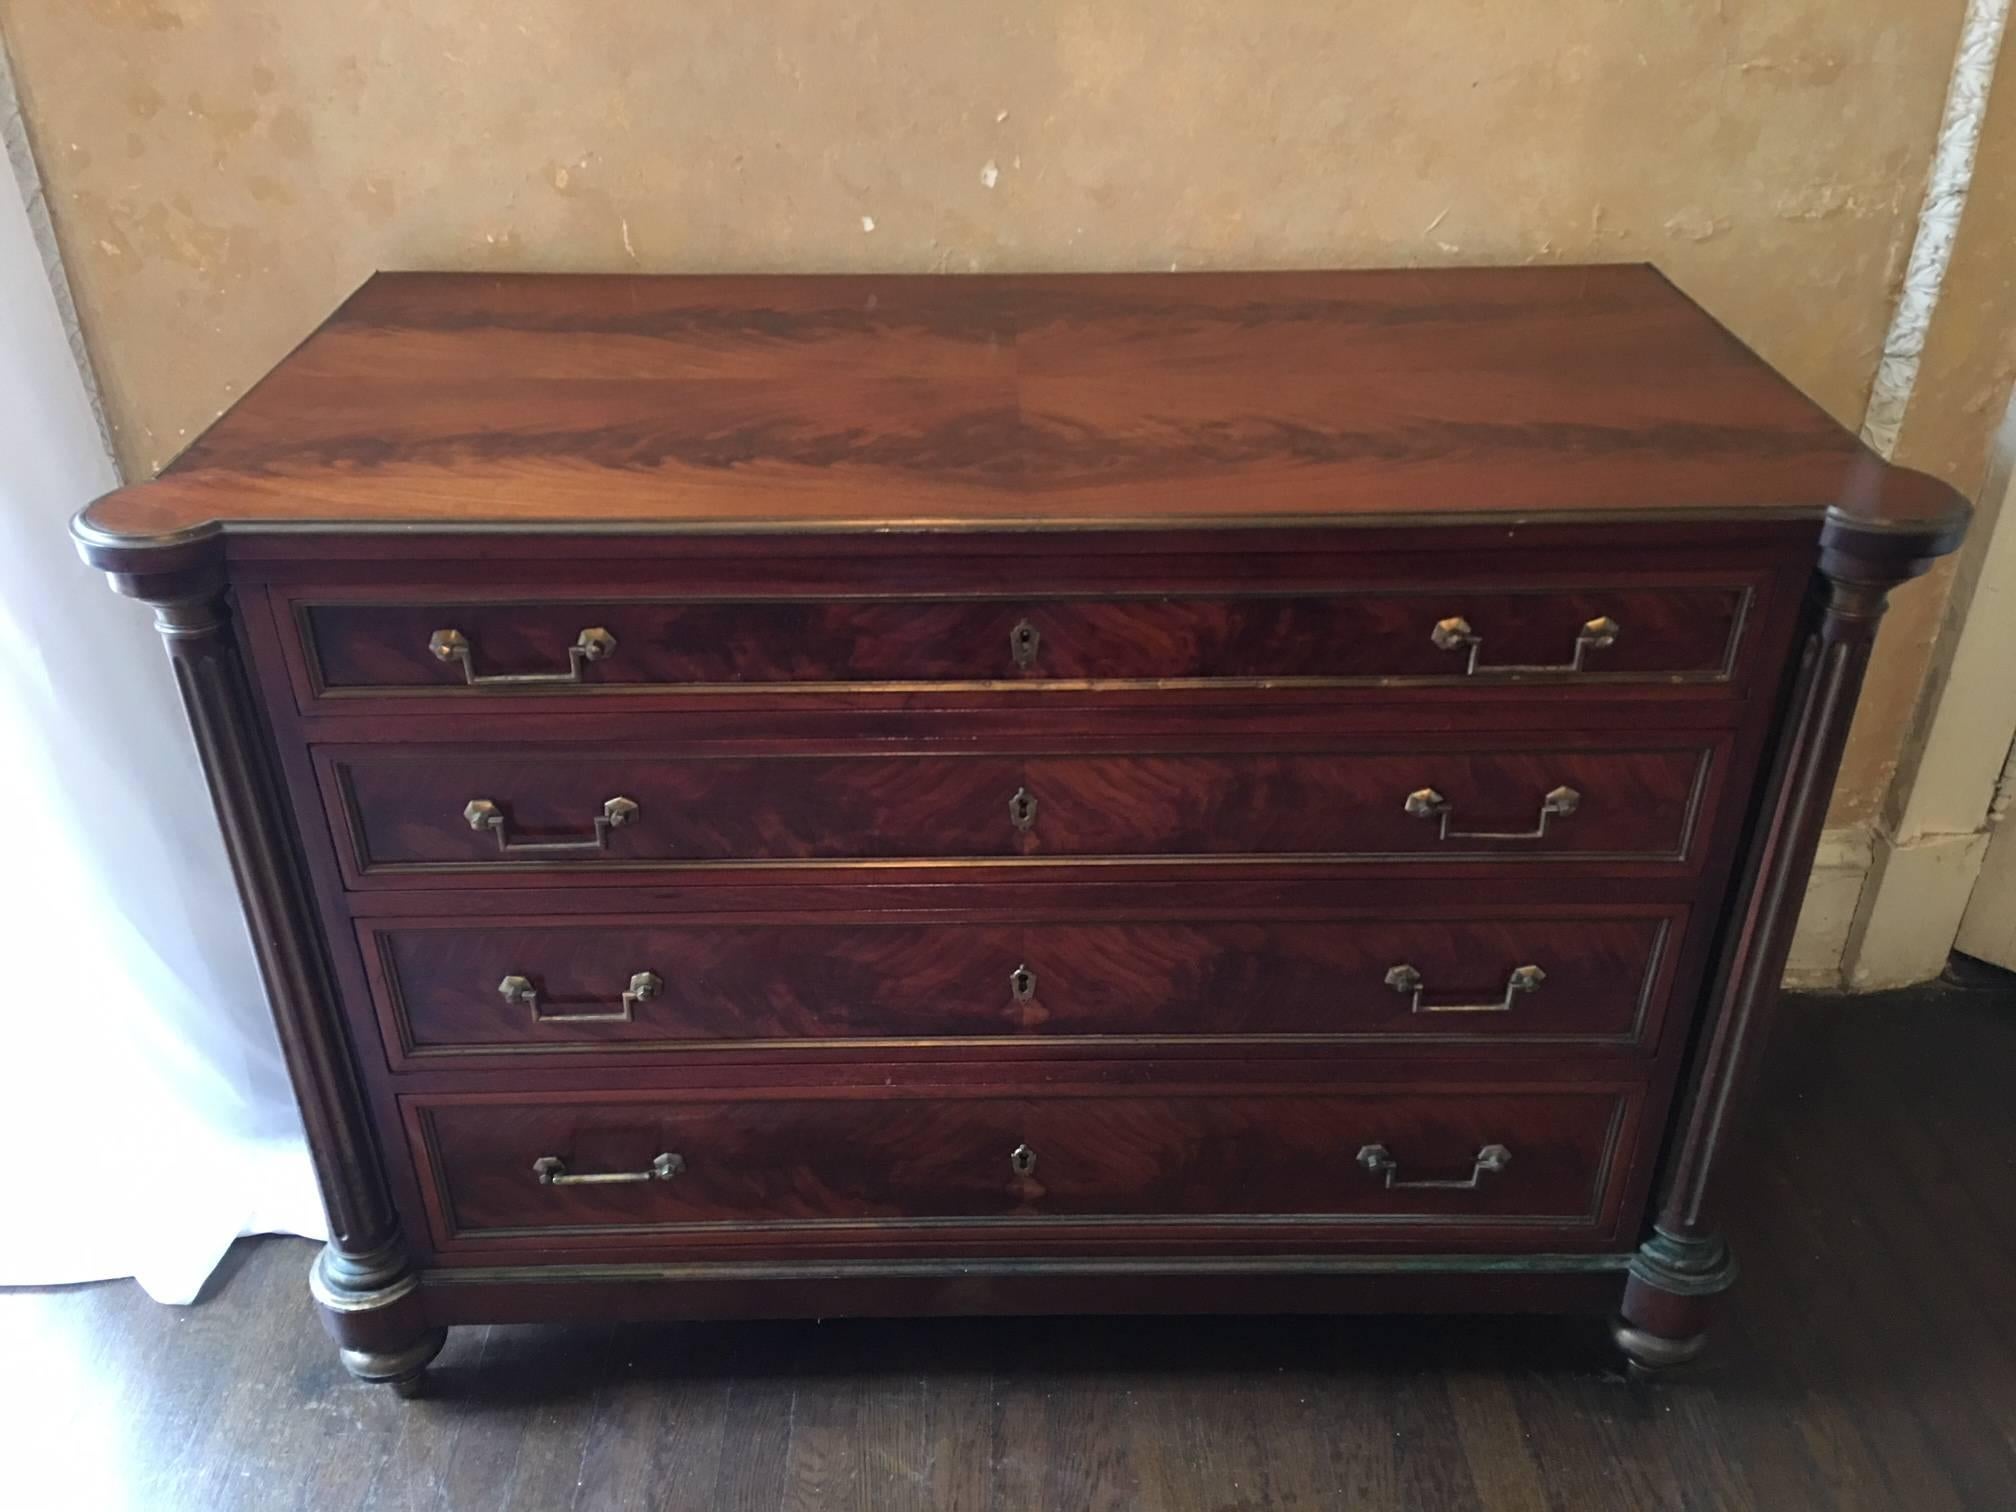 French Empire style four-drawer Napoleonic commode, circa 1850. Brass ormolu columns and crotch mahogany veneer.
 